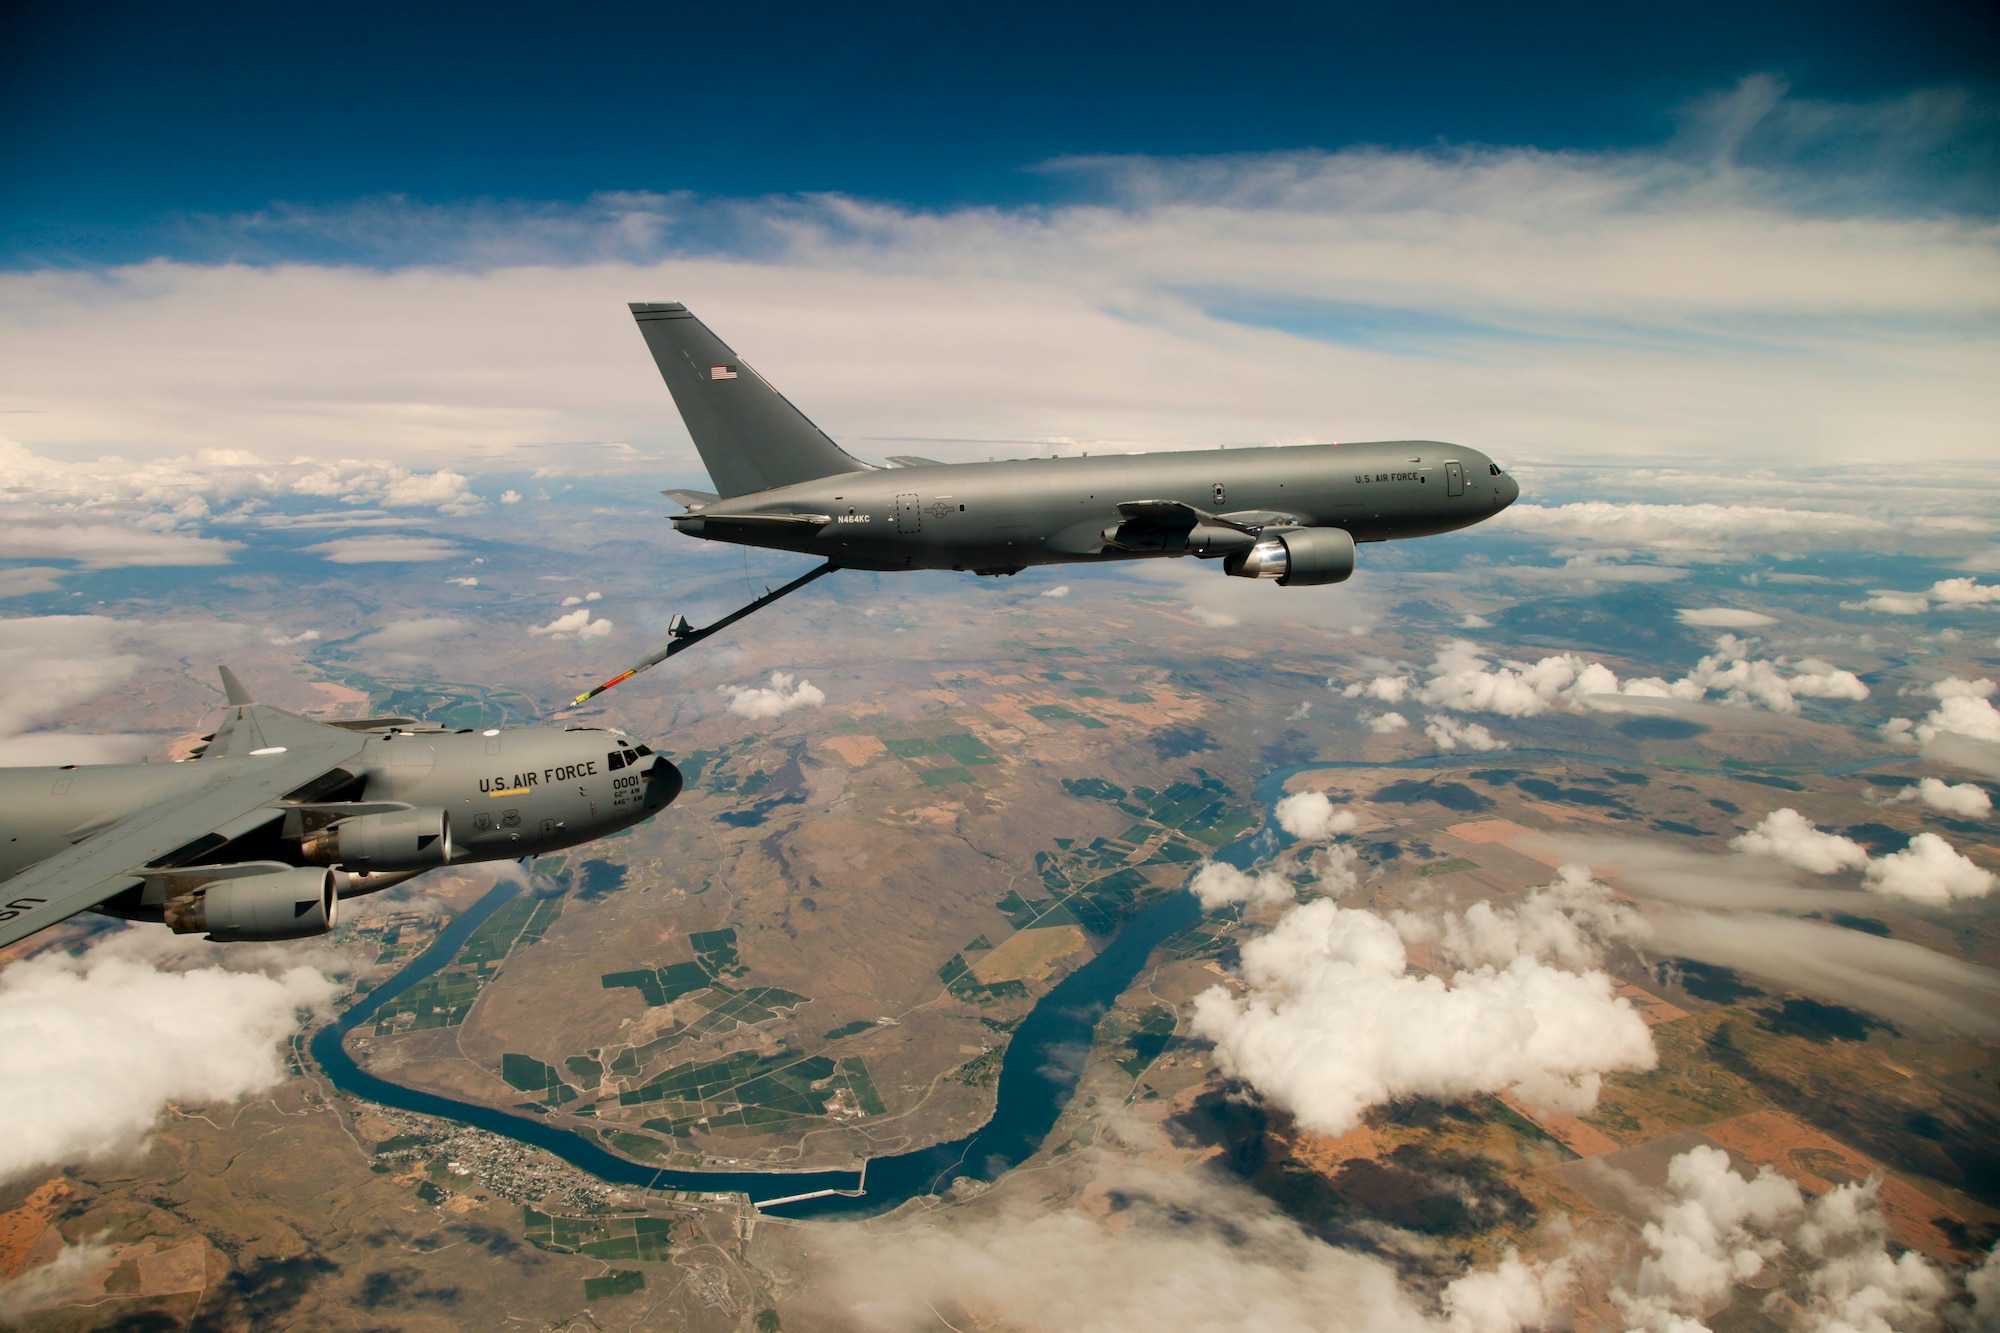 A KC-46 Pegasus refueling tanker conducts receiver compatibility tests with a C-17 Globemaster III from Joint Base Lewis-McChord. (U.S. Air Force photo by Christopher Okula)